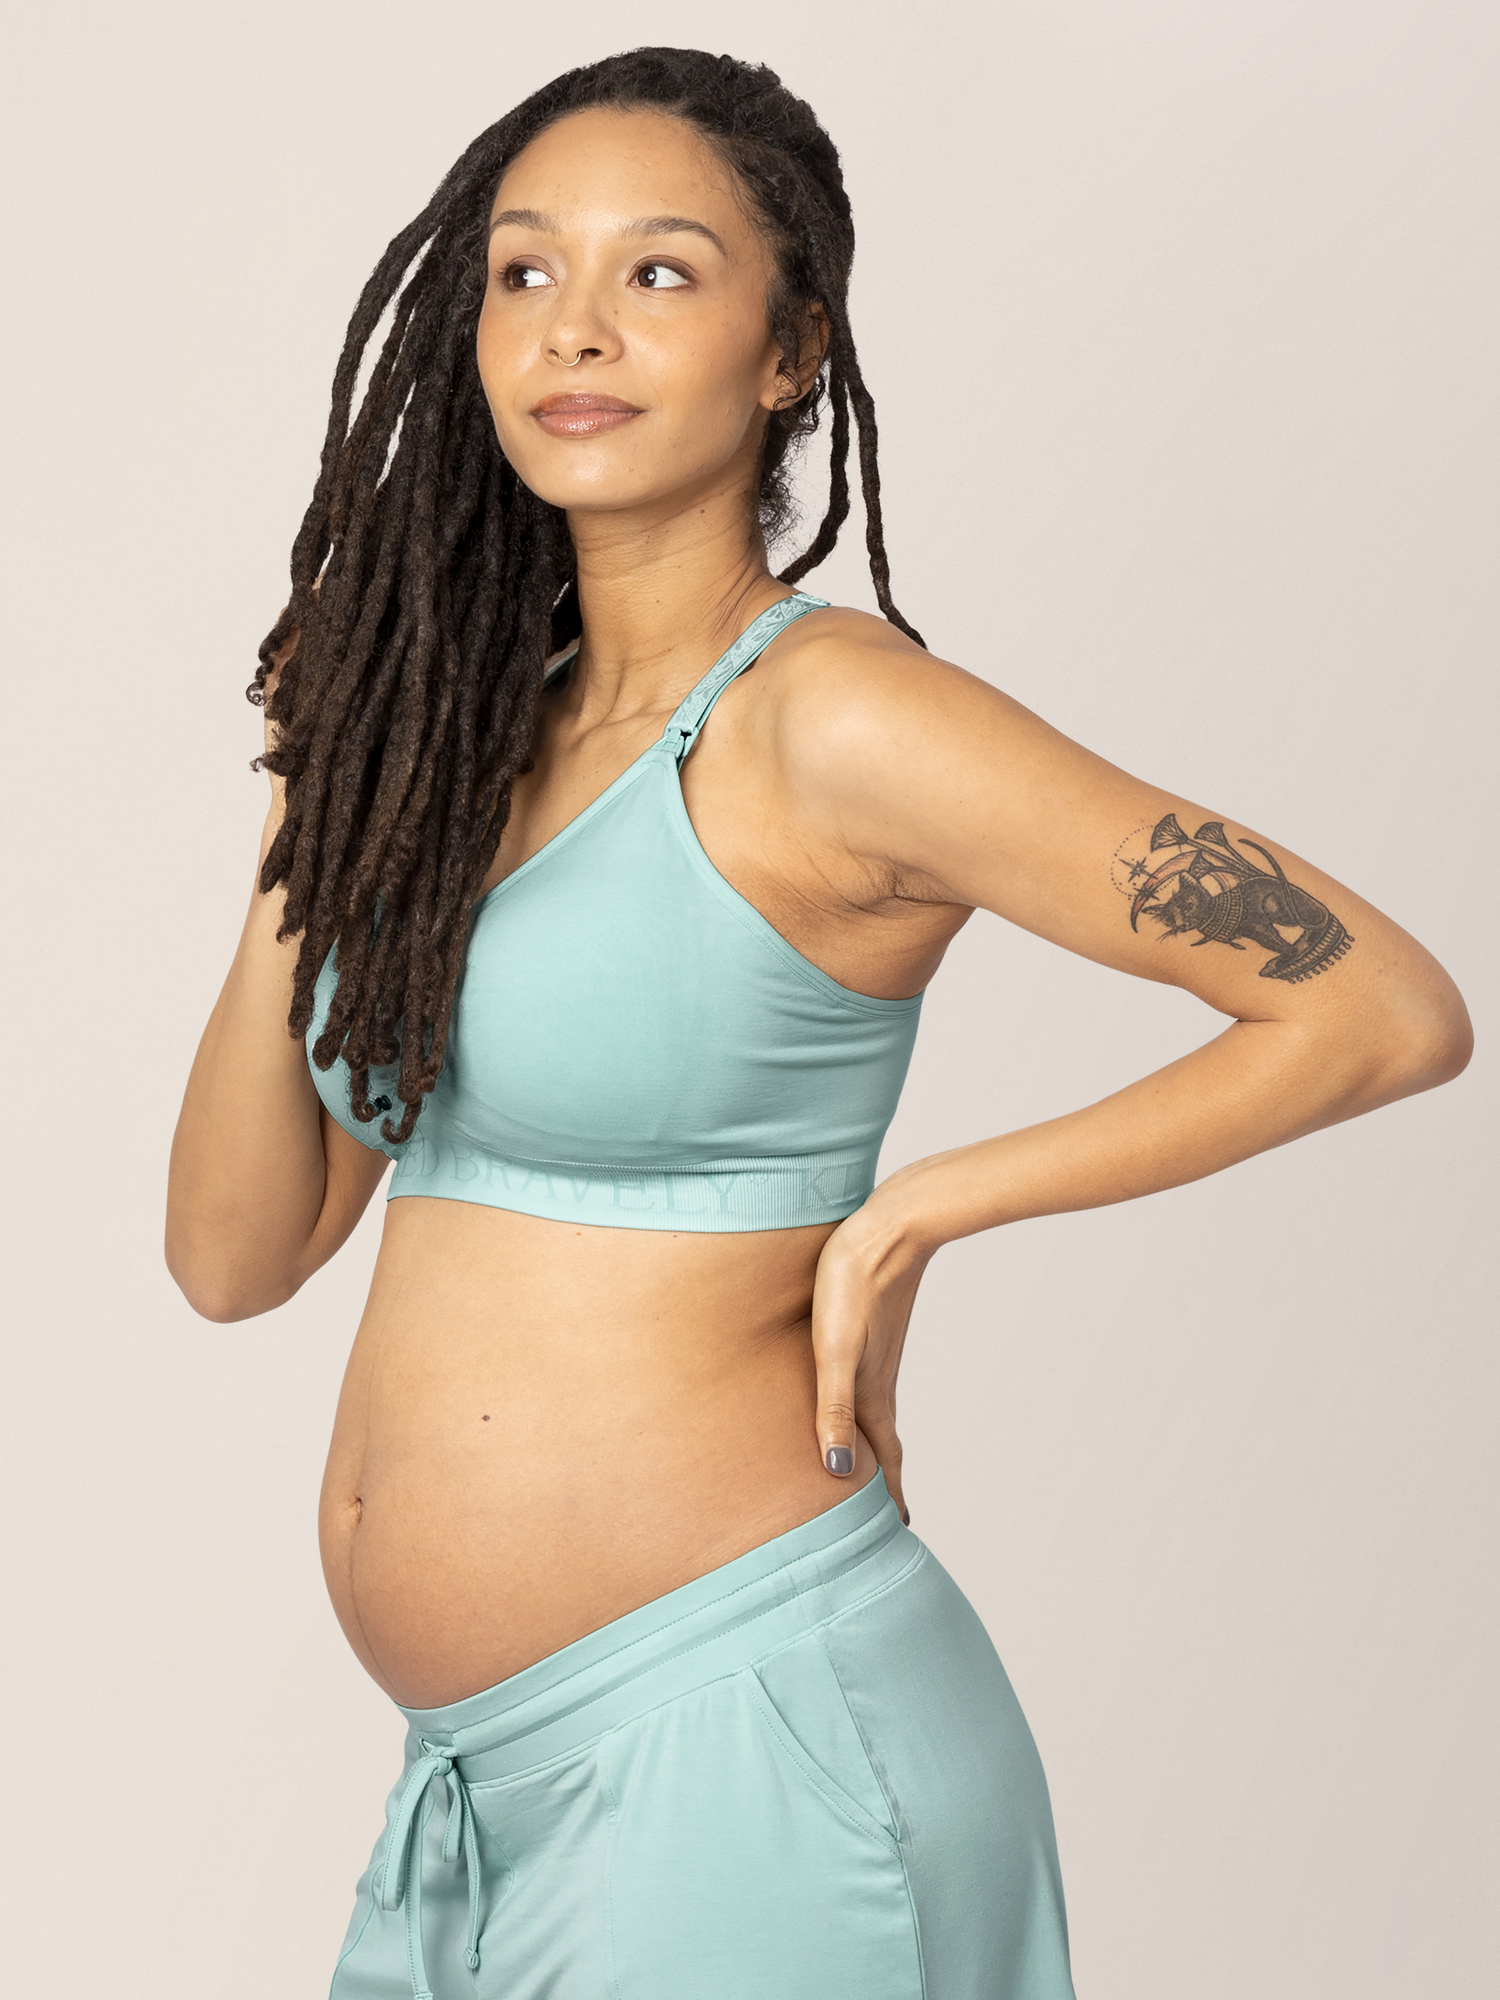 Pregnant model with her hand on her hip and in her hair wearing the Sublime® Hands-Free Pumping & Nursing Sports Bra in Dusty Blue Green. 